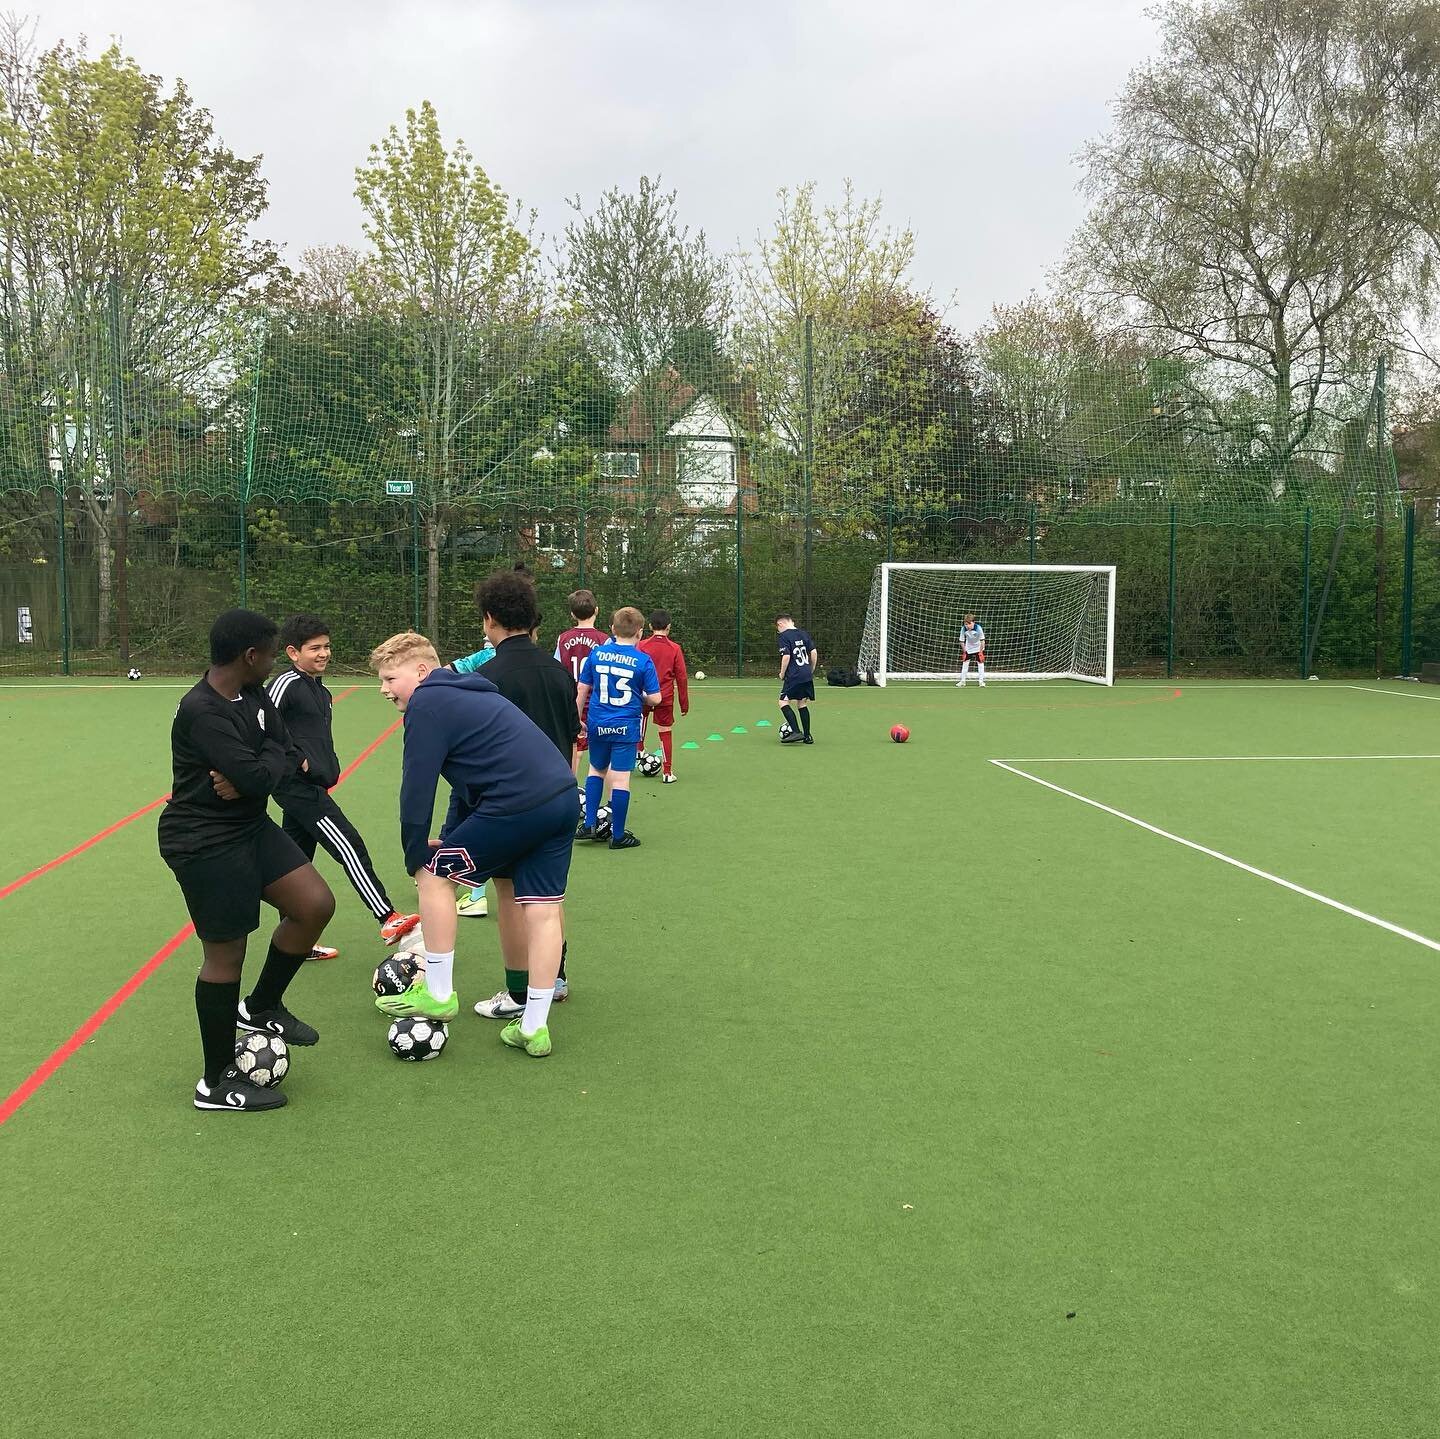 Good sessions today from all our Kings Heath groups.

Outdoor and indoor spaces at Wheelers Lane were both in use as all groups worked on perfecting those skills and having fun while doing it.

Well done to all involved!
#FootballFUNatics #Football #